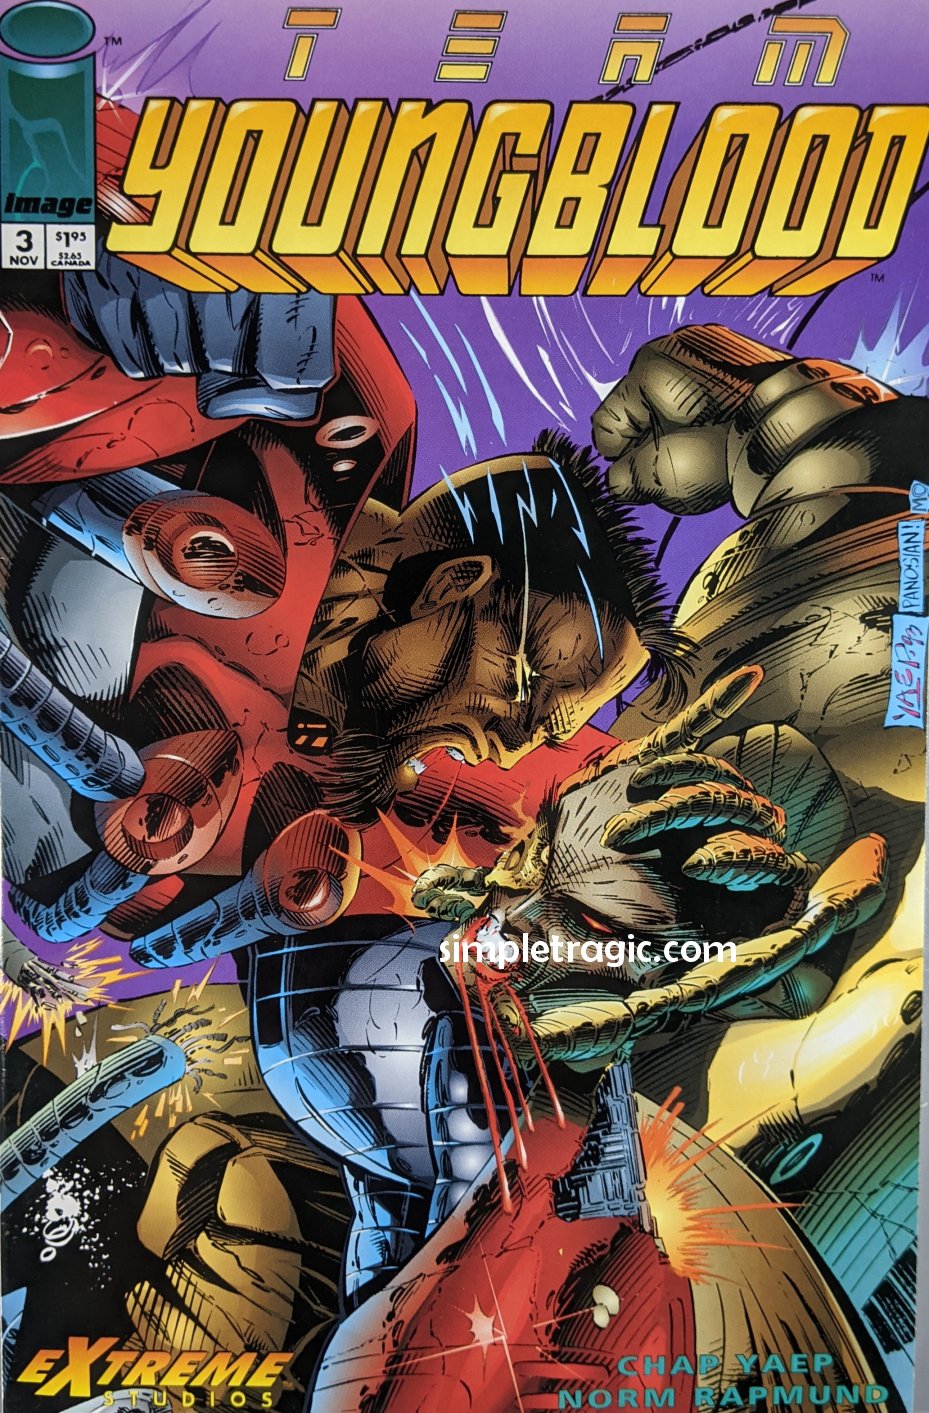 Team Youngblood (1993) #3